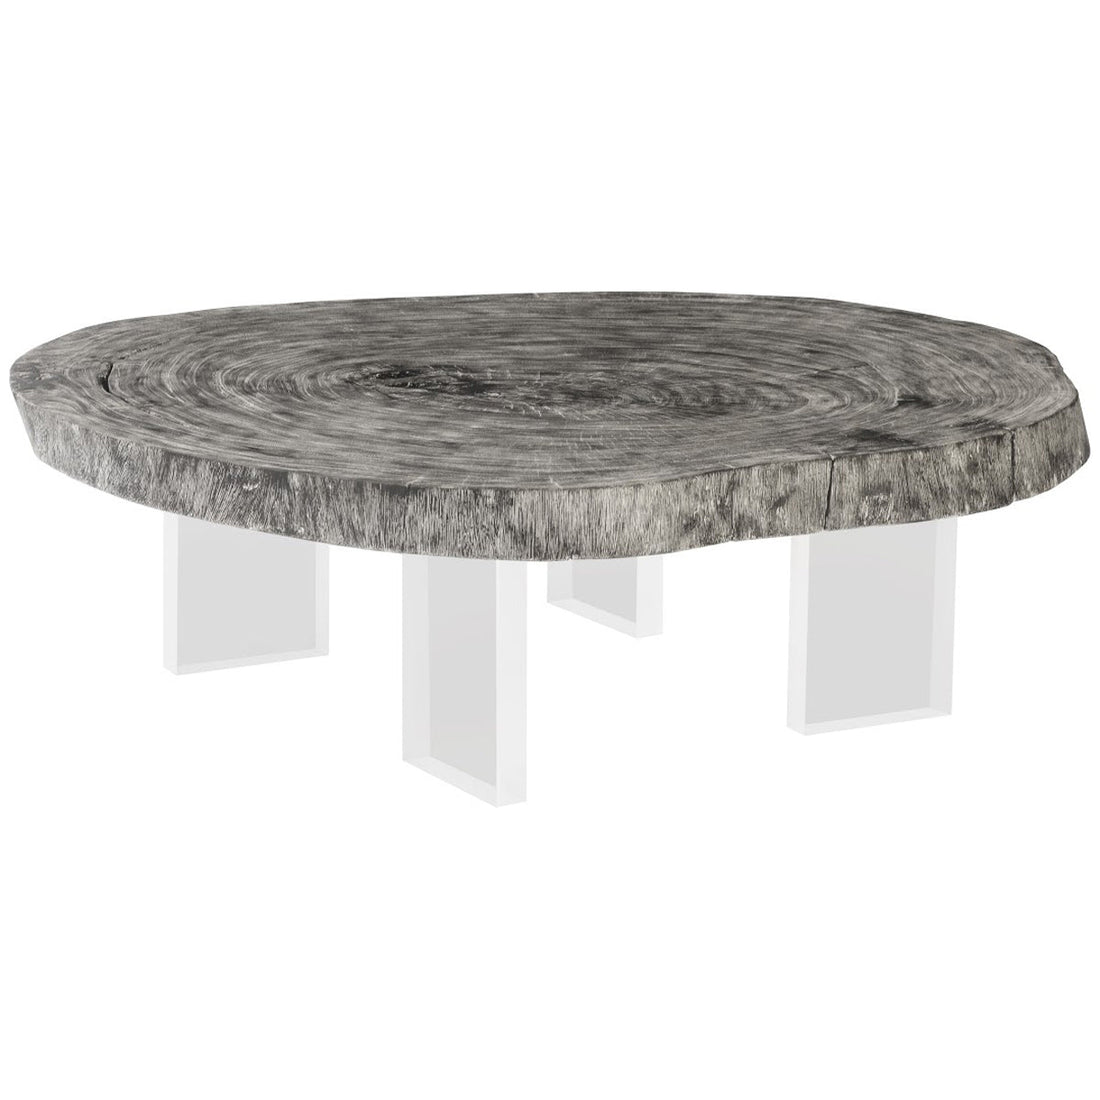 Phillips Collection Floating Coffee Table on Acrylic Legs